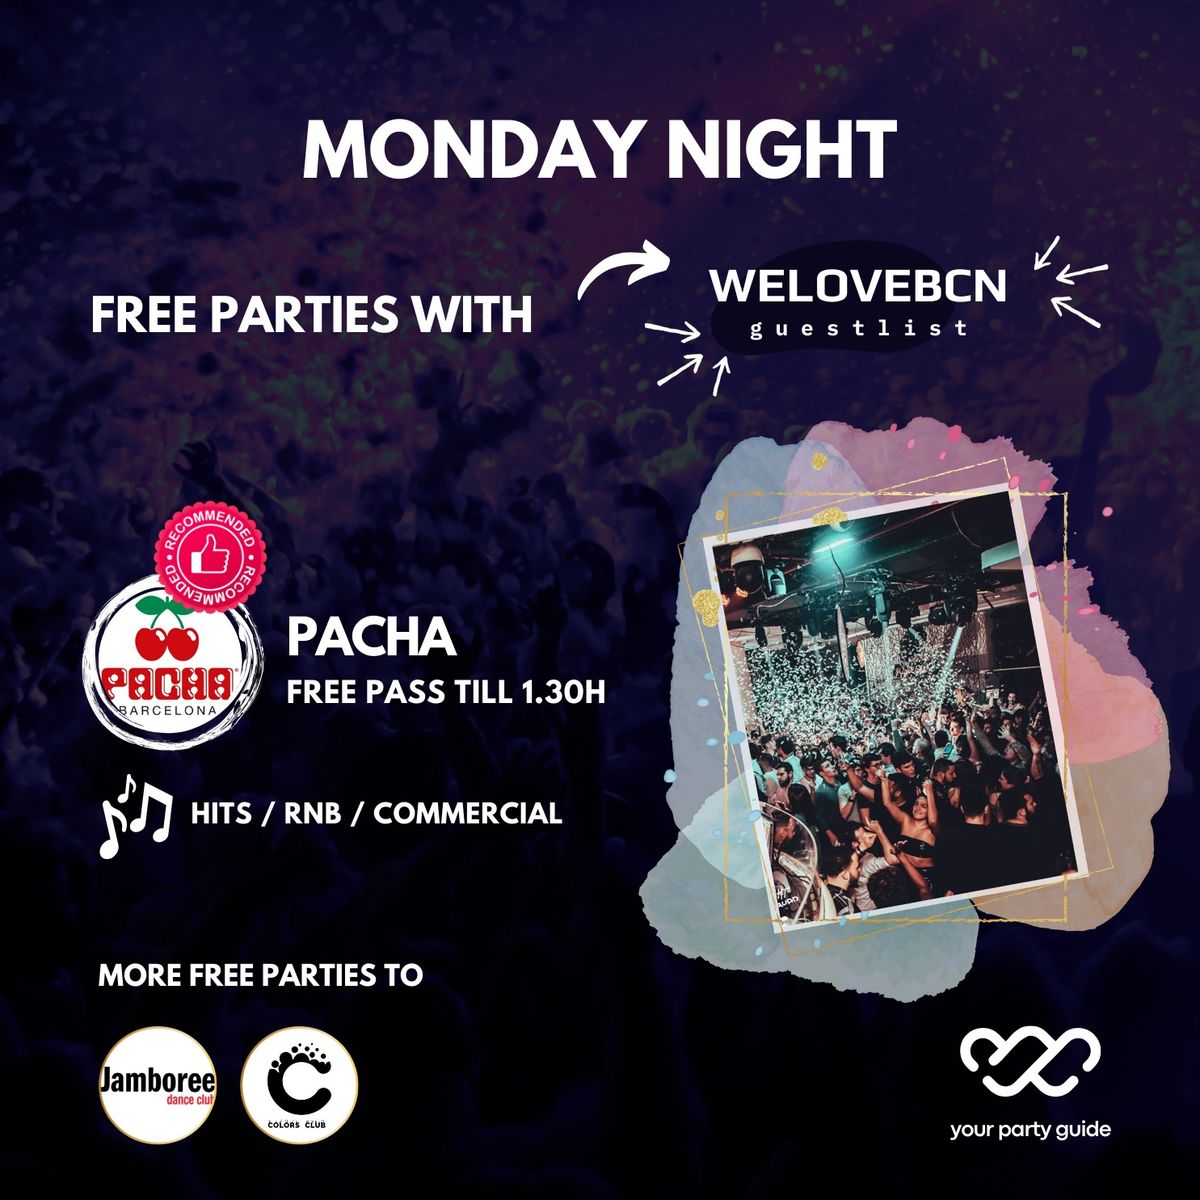 EVERY Monday Erasmus Party at Pacha FREE entry with WELOVEBCN LIST